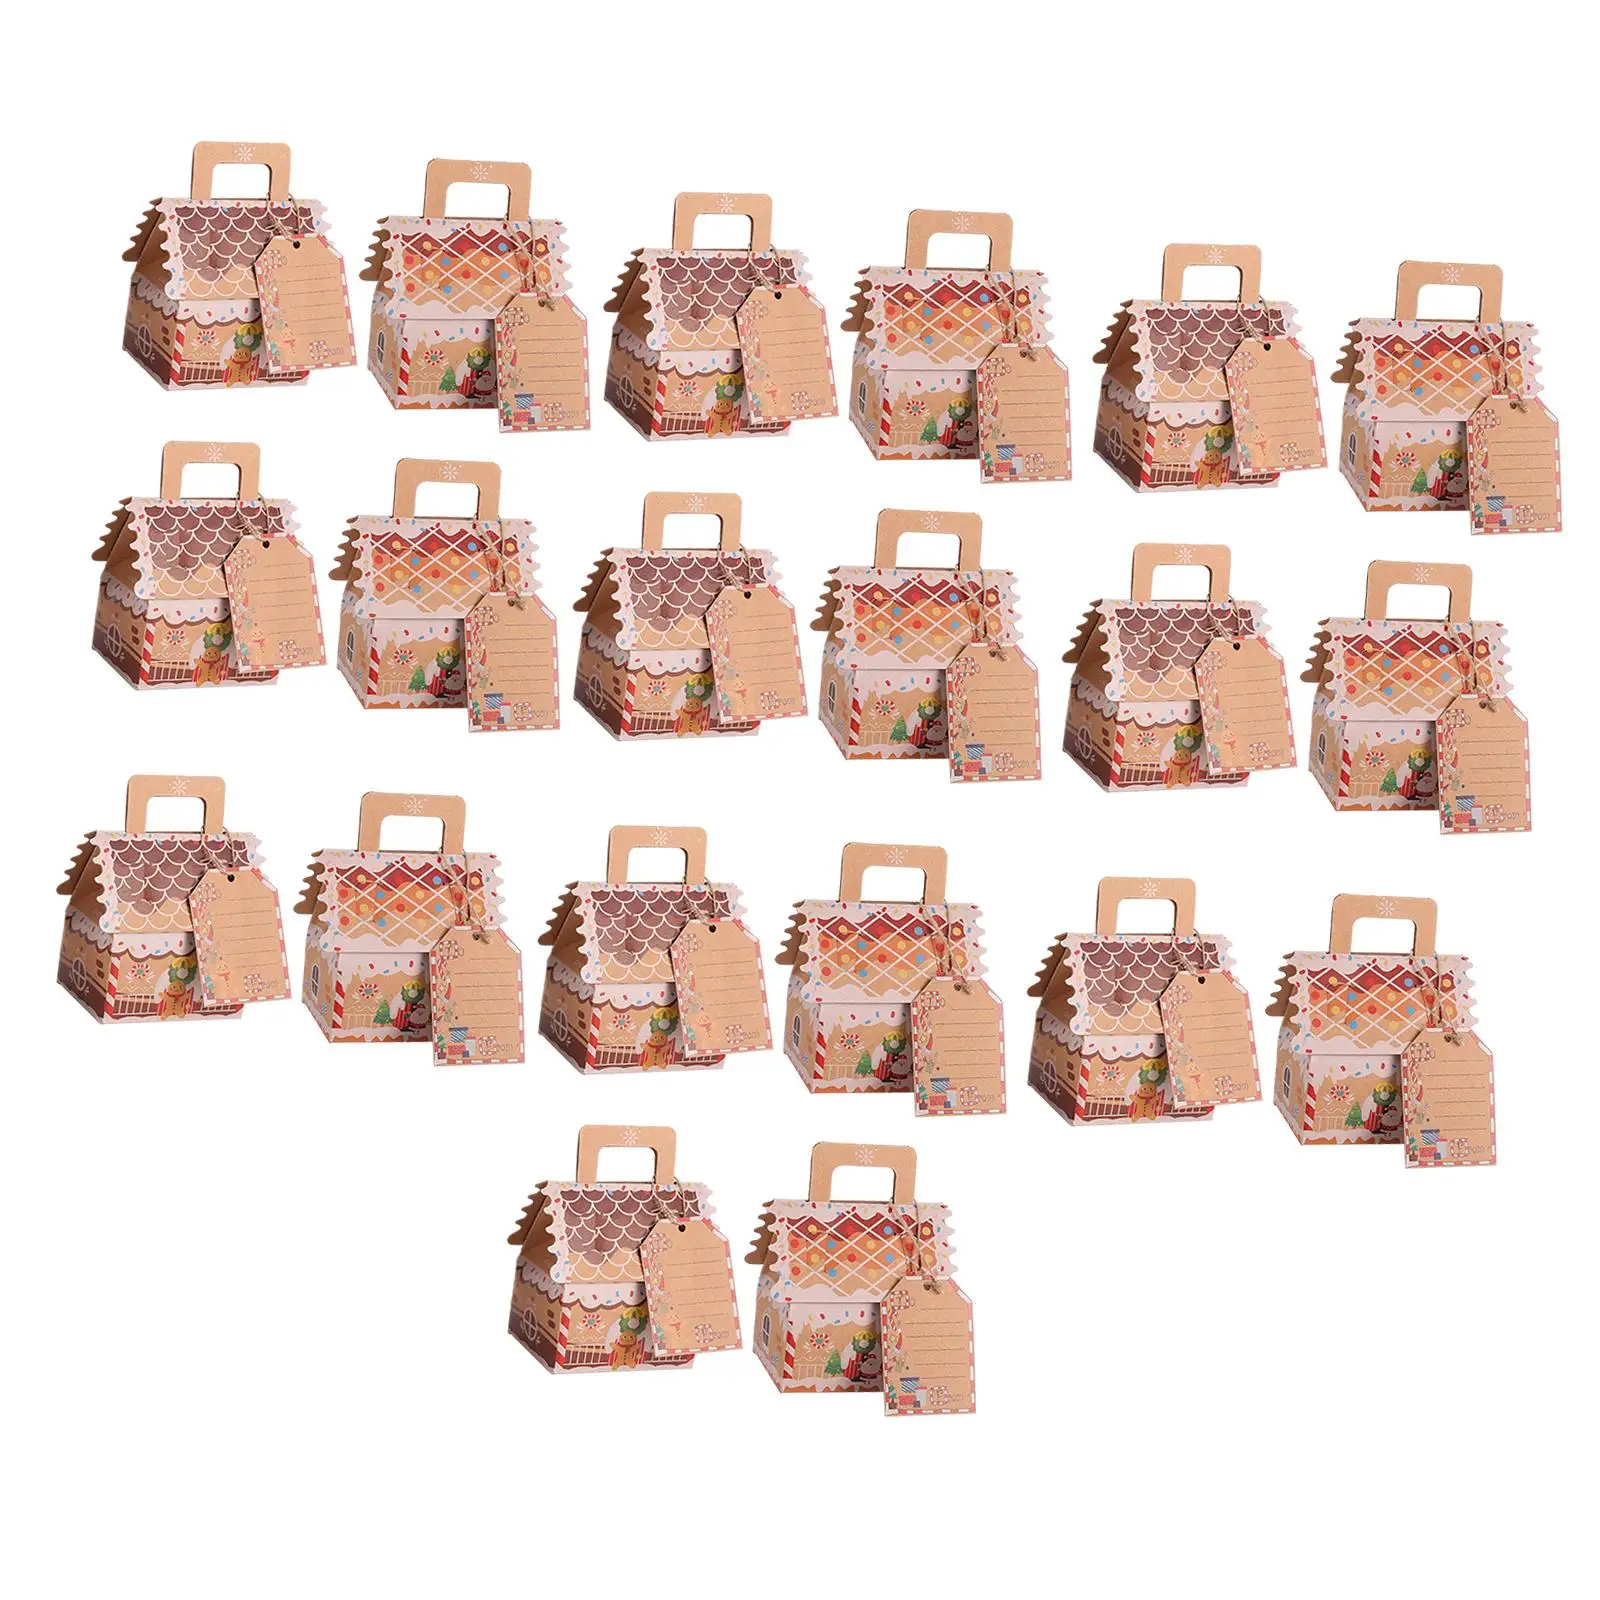 20 Pieces Candy Boxes Biscuits Bag Creative with Name Tags Christmas Treat Bags for Xmas Party Festival Birthday Holiday Dessert